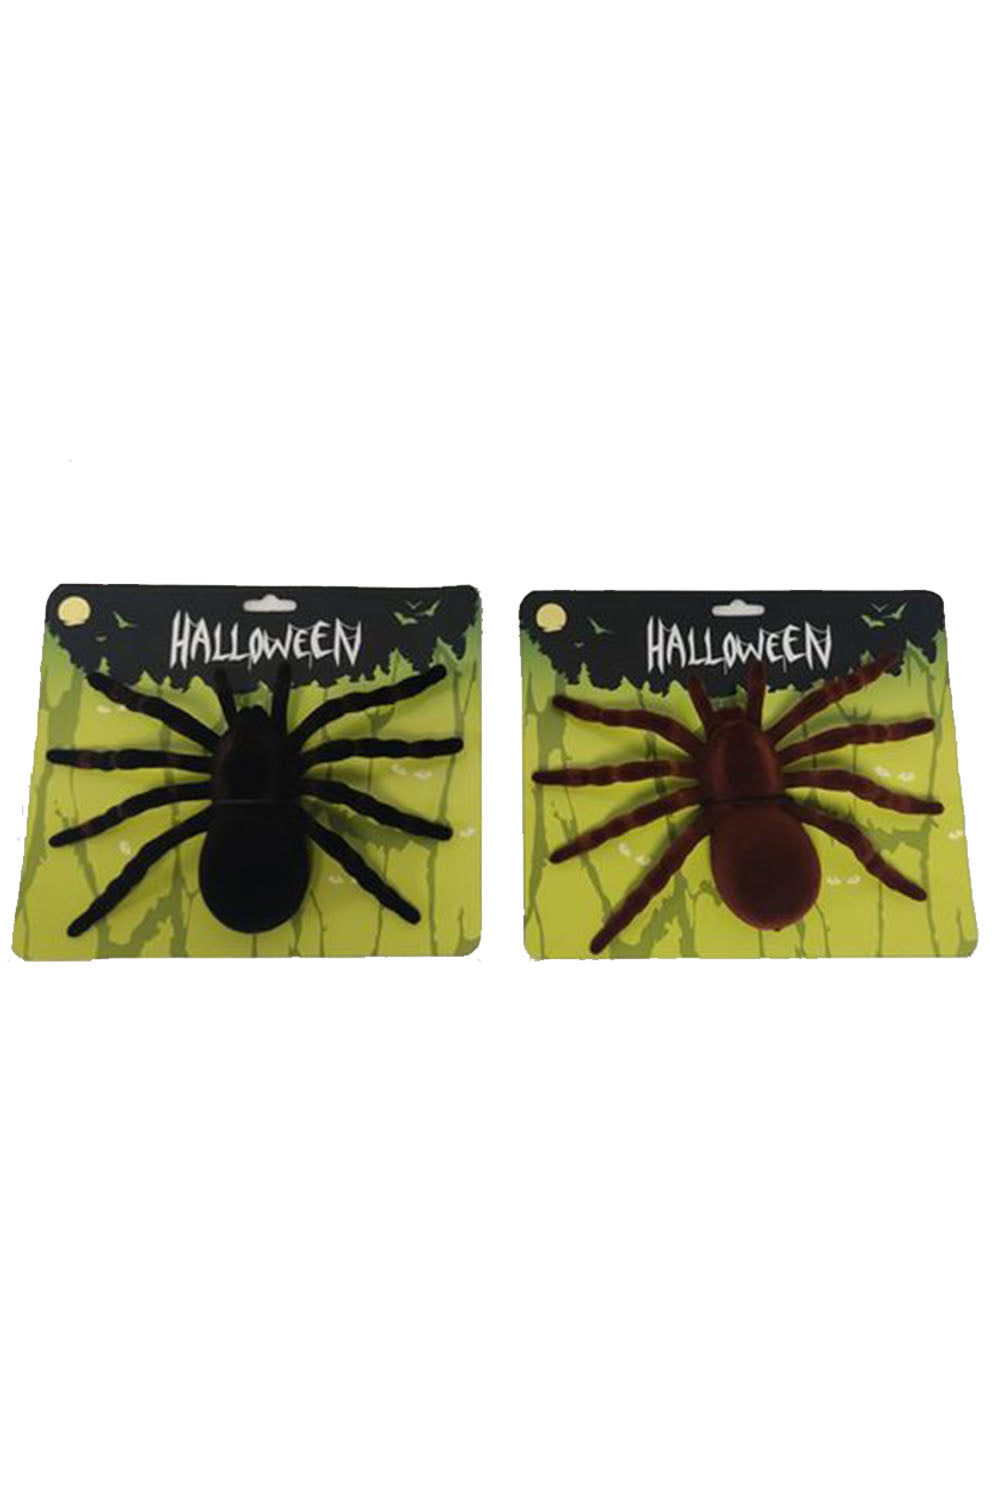 Scary Spider Party Decor